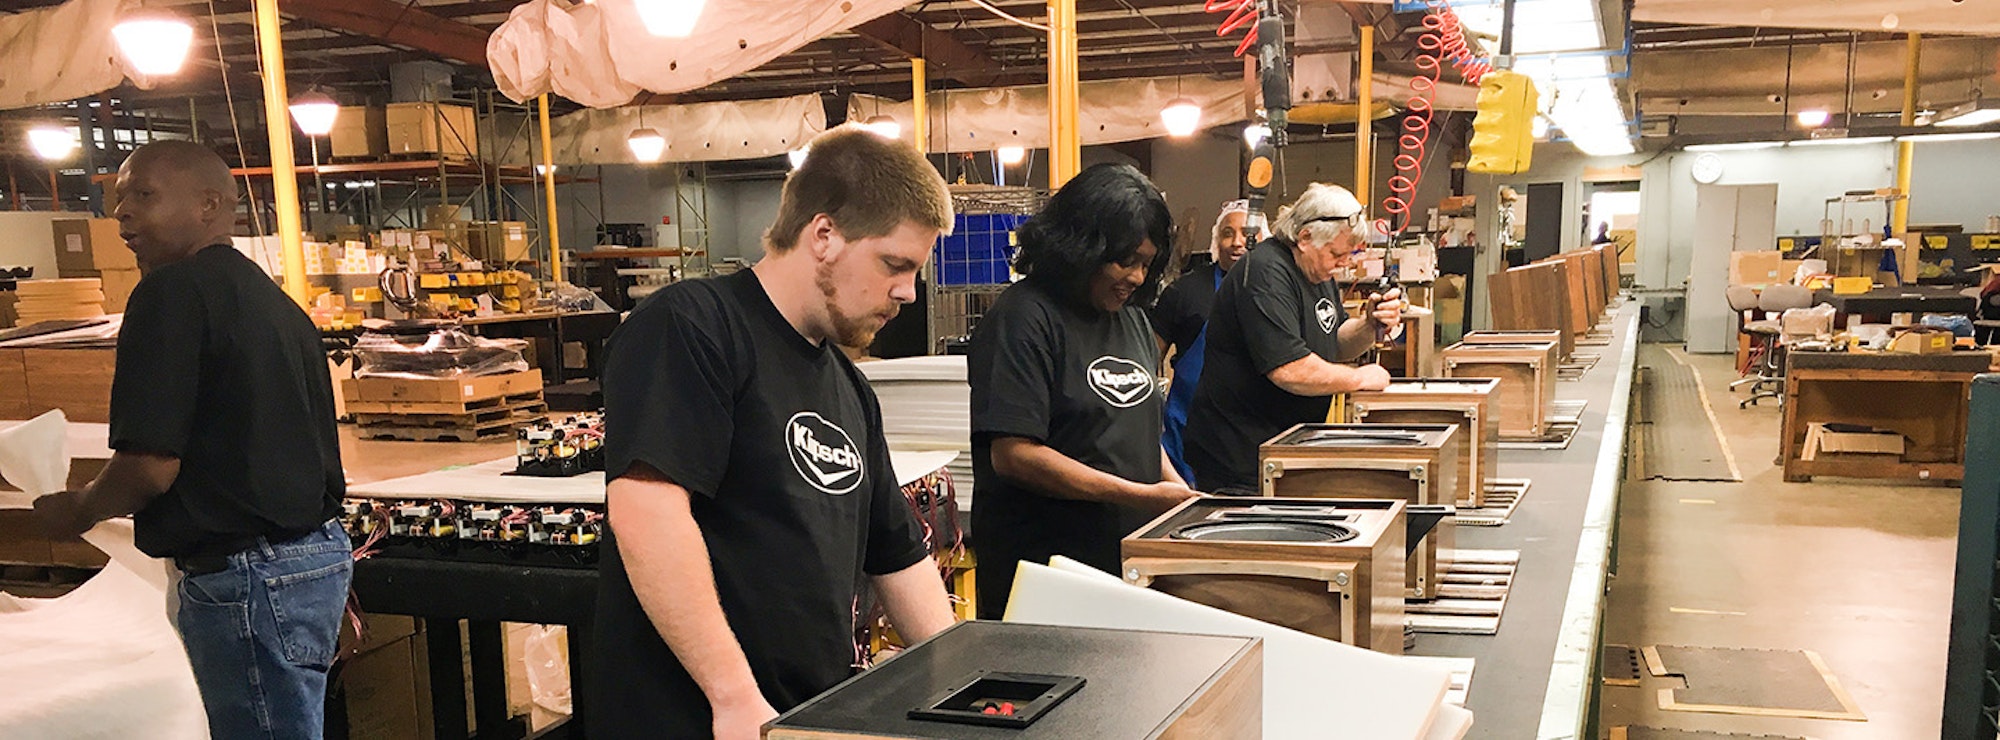 Klipsch employees building speakers on an assembly line